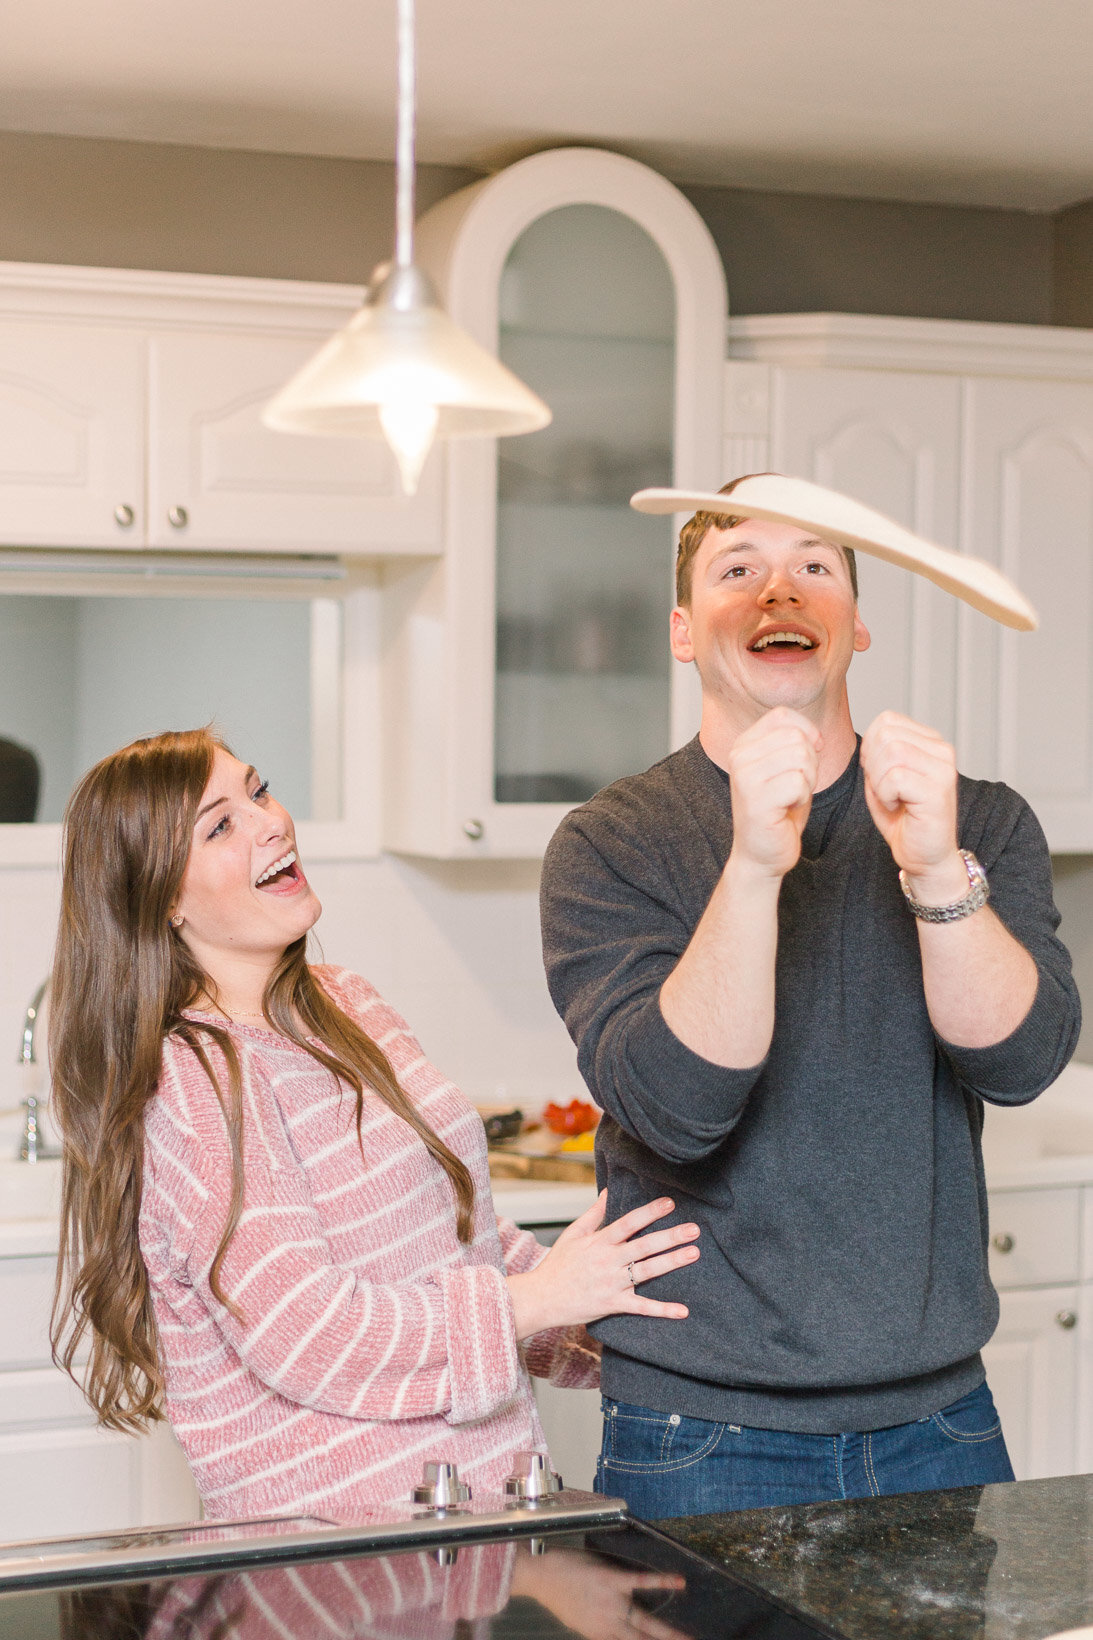 Tossing pizza dough captured by Staci Addison Photography